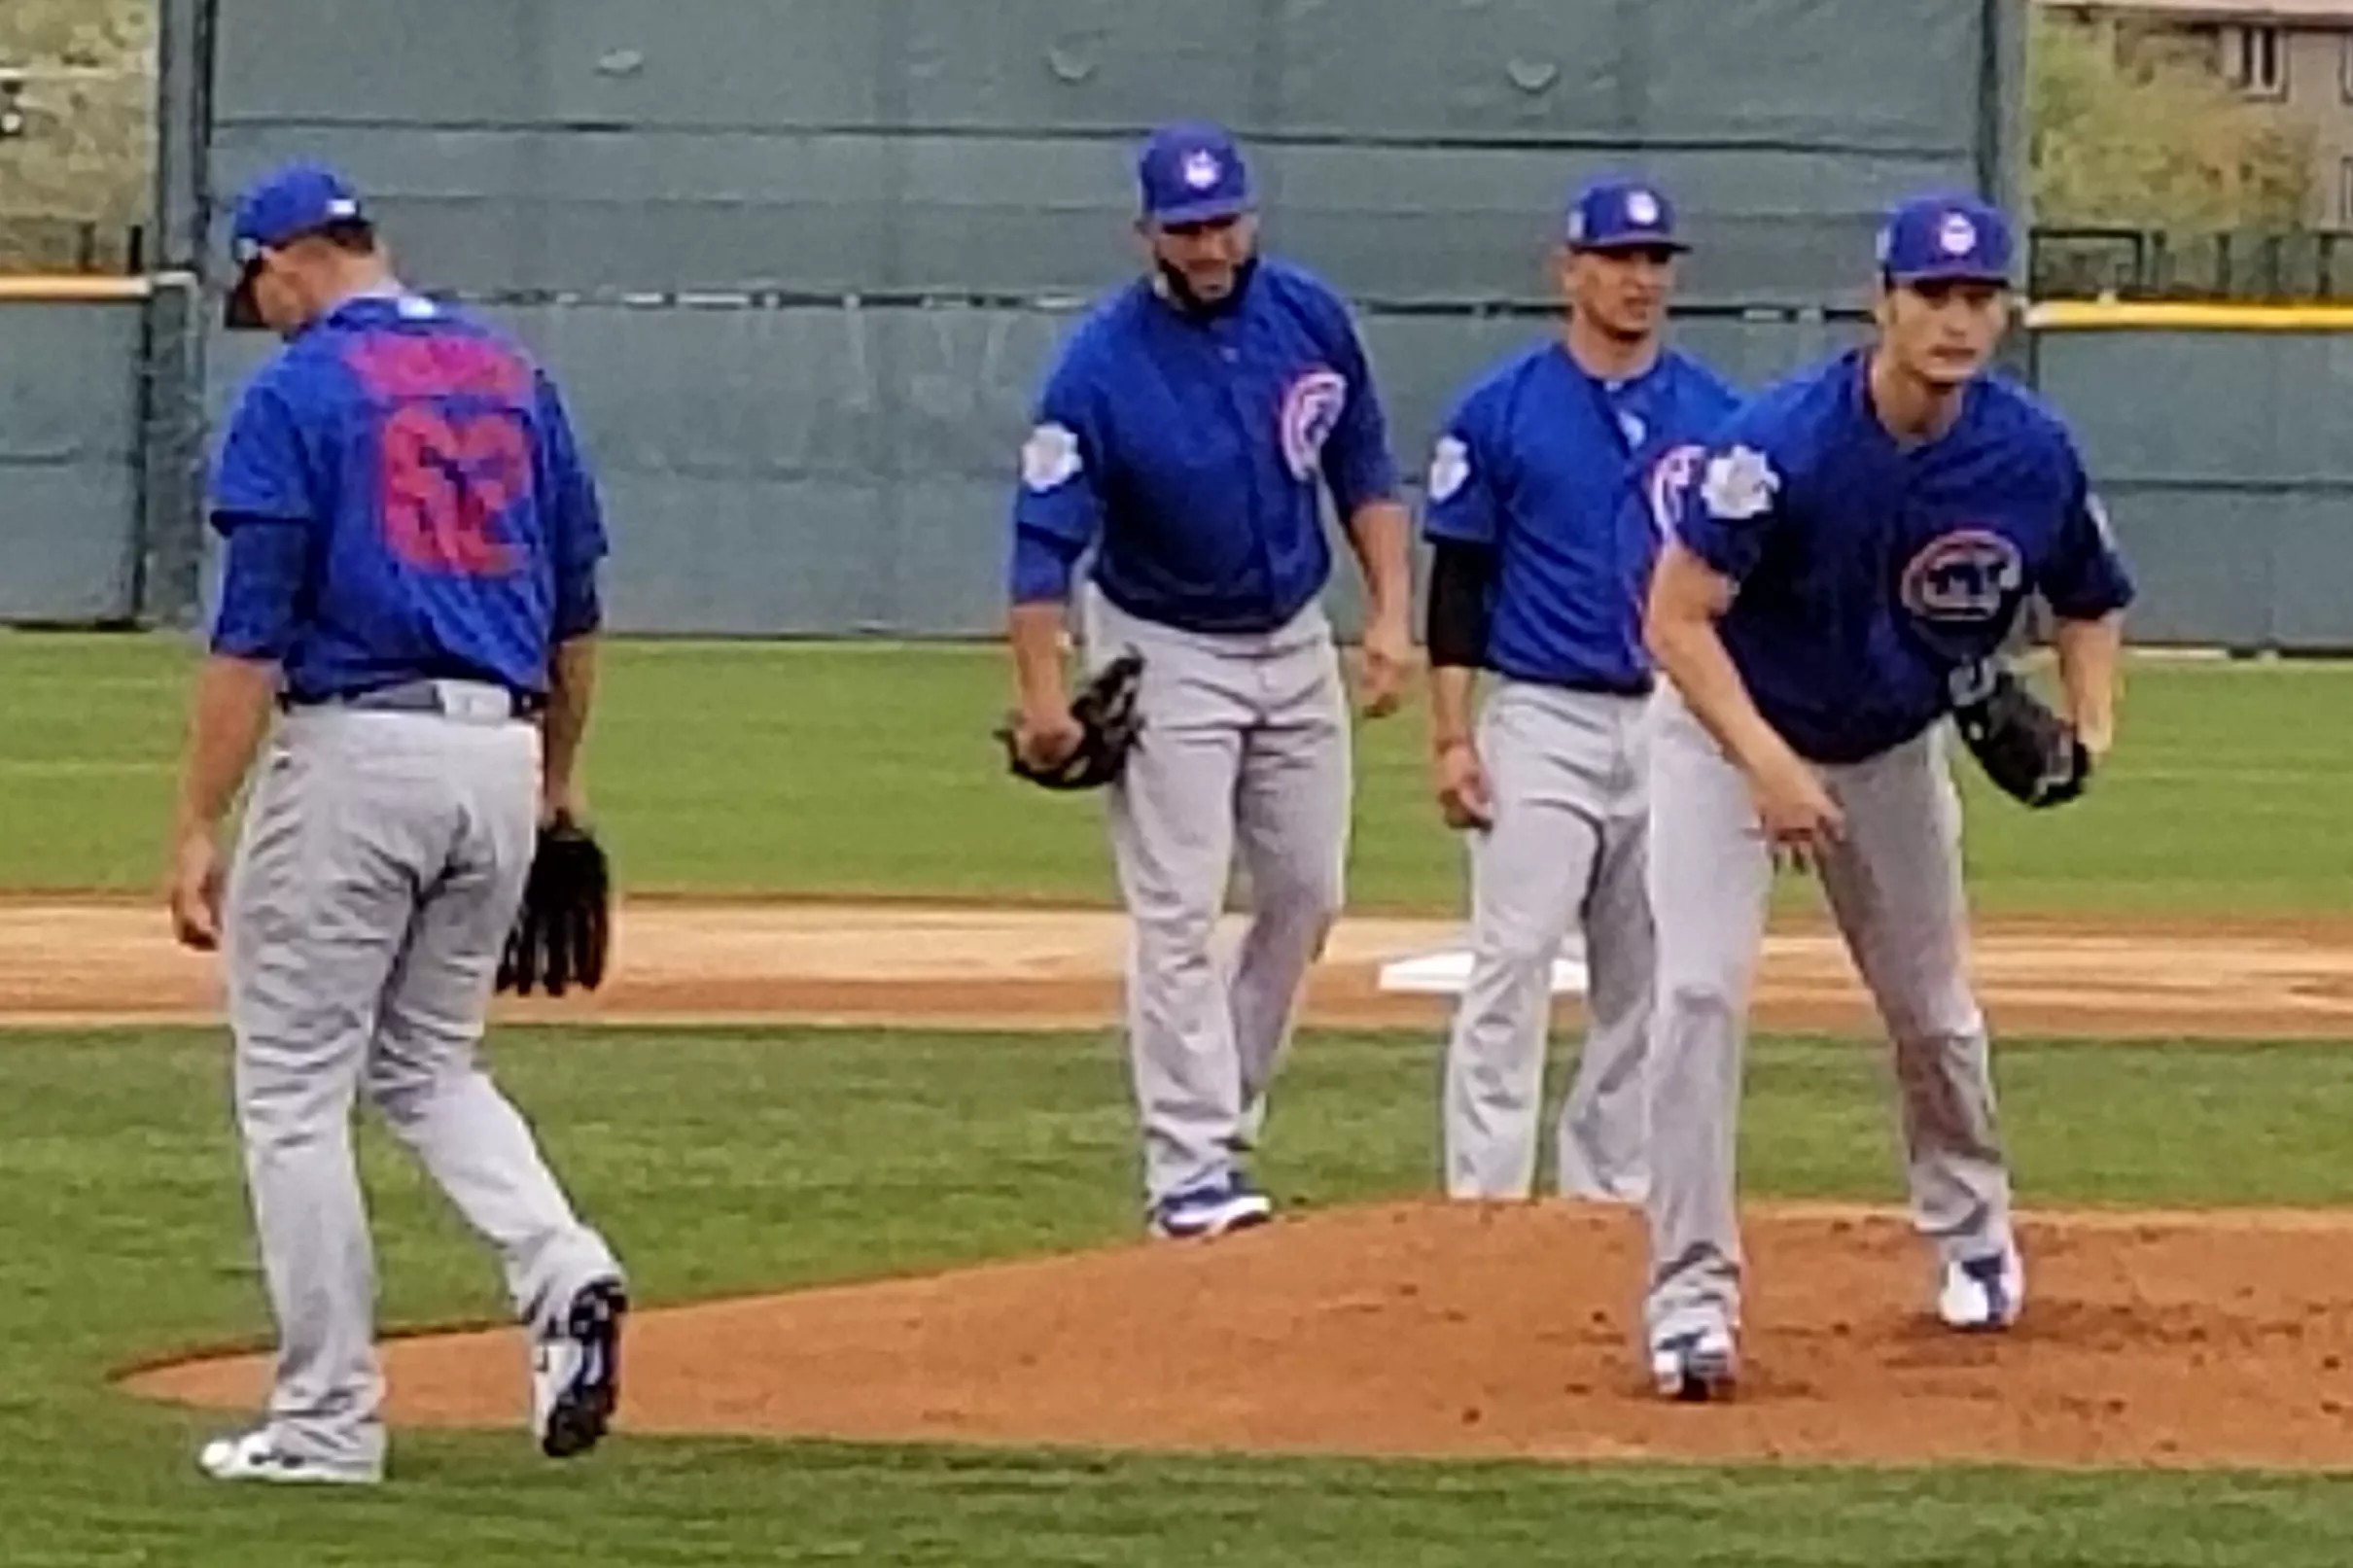 Cubs pitchers and catchers will report on February 12